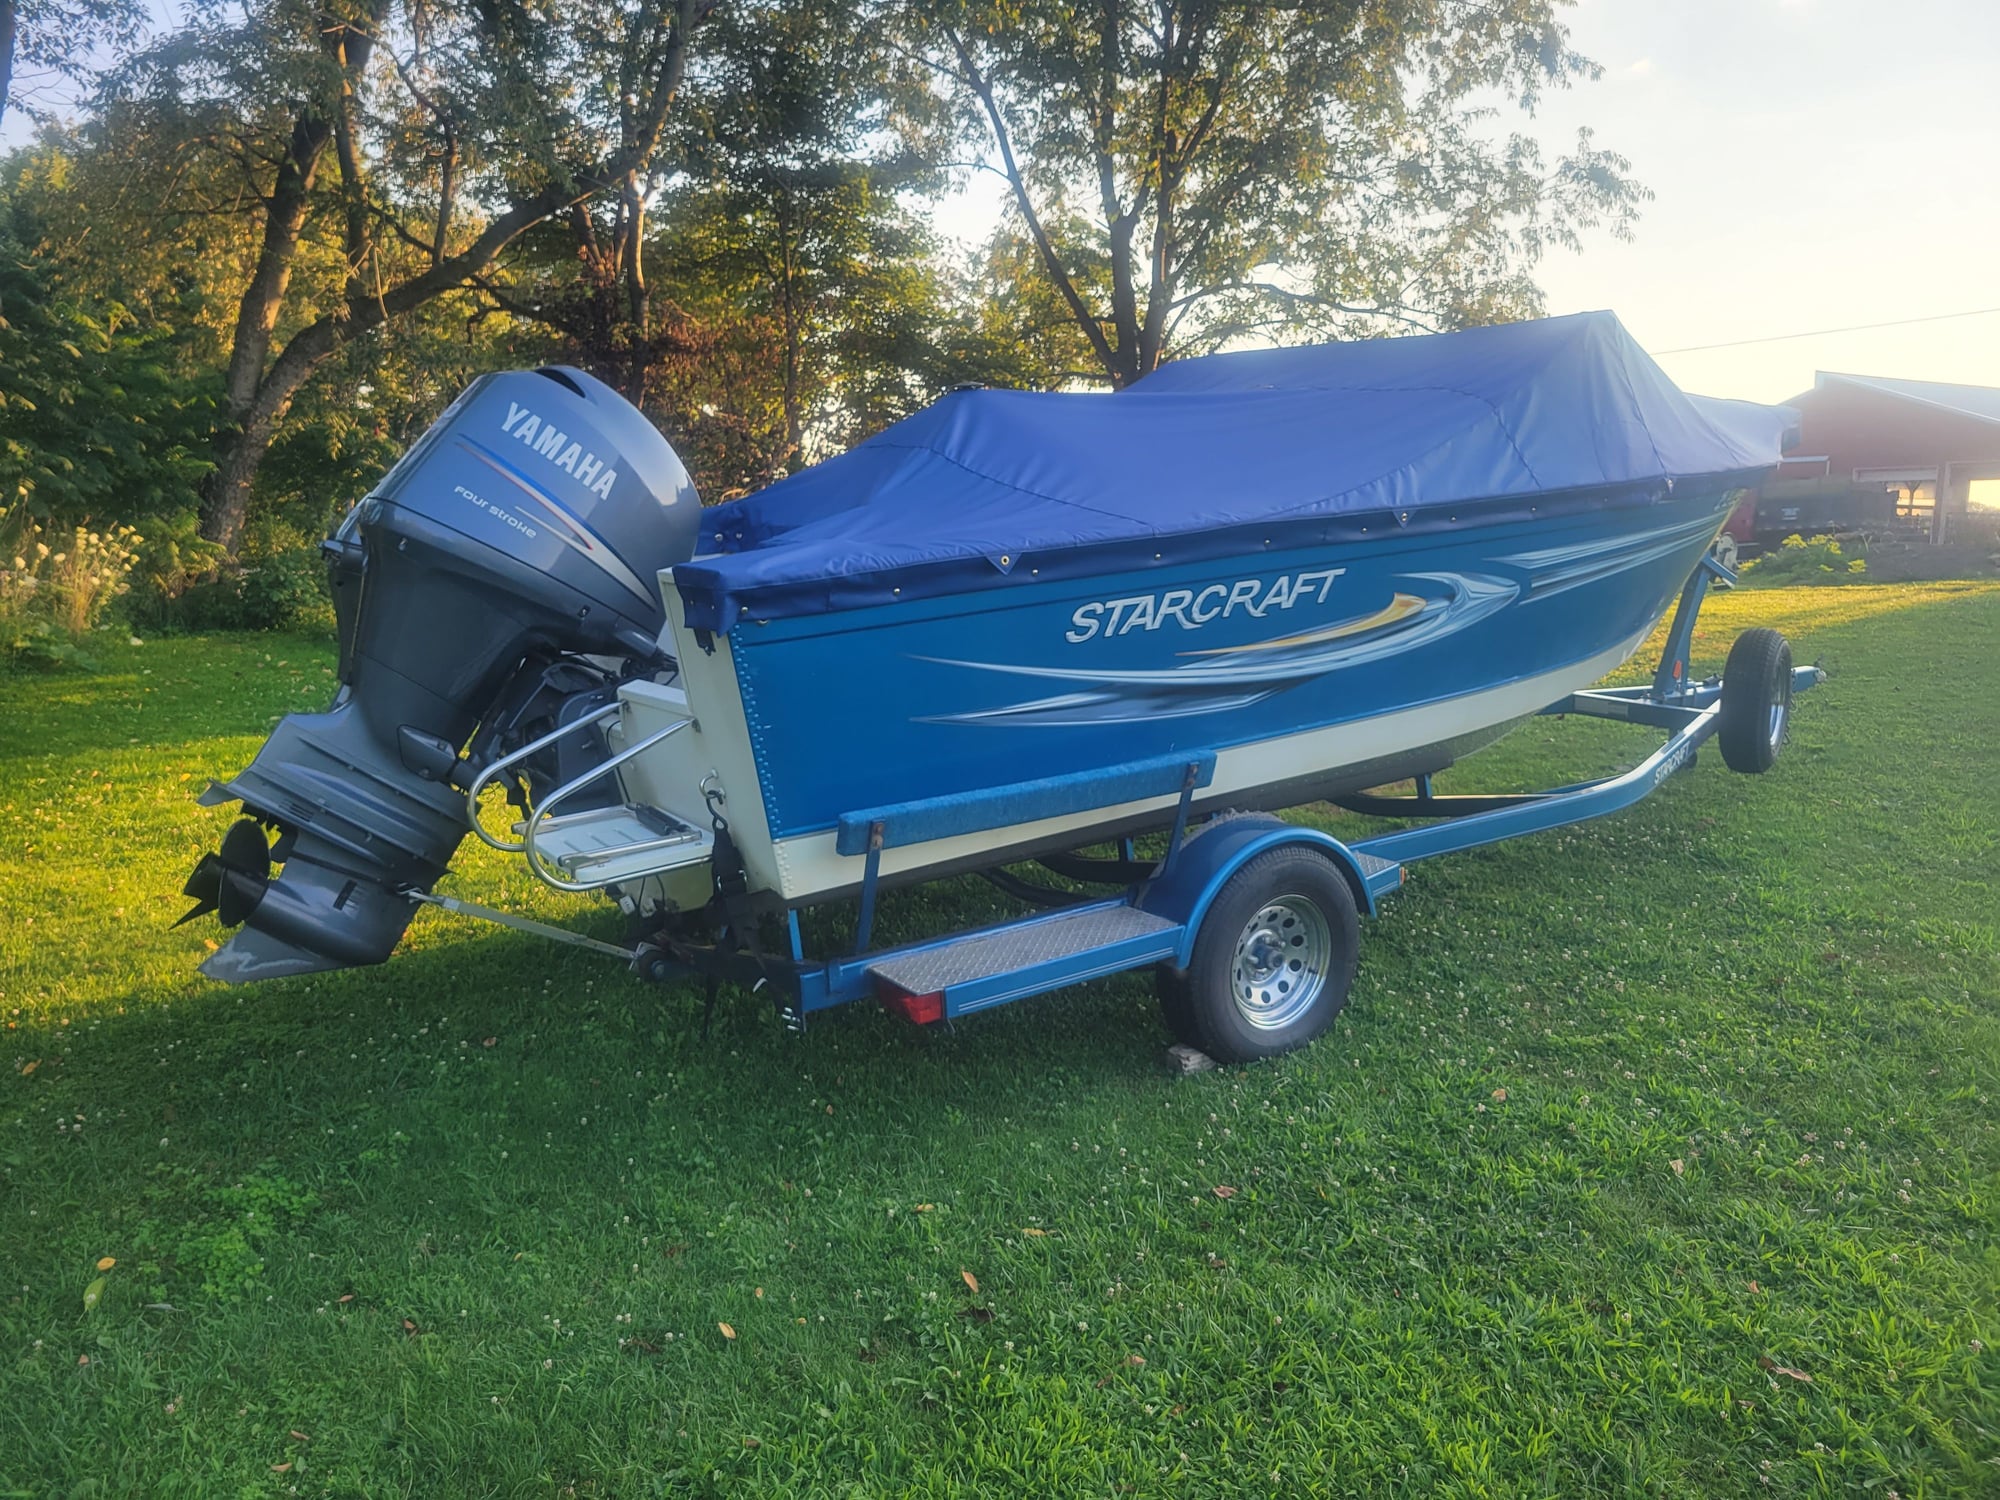 2011 starcraft 19'6 fishmaster - The Hull Truth - Boating and Fishing Forum